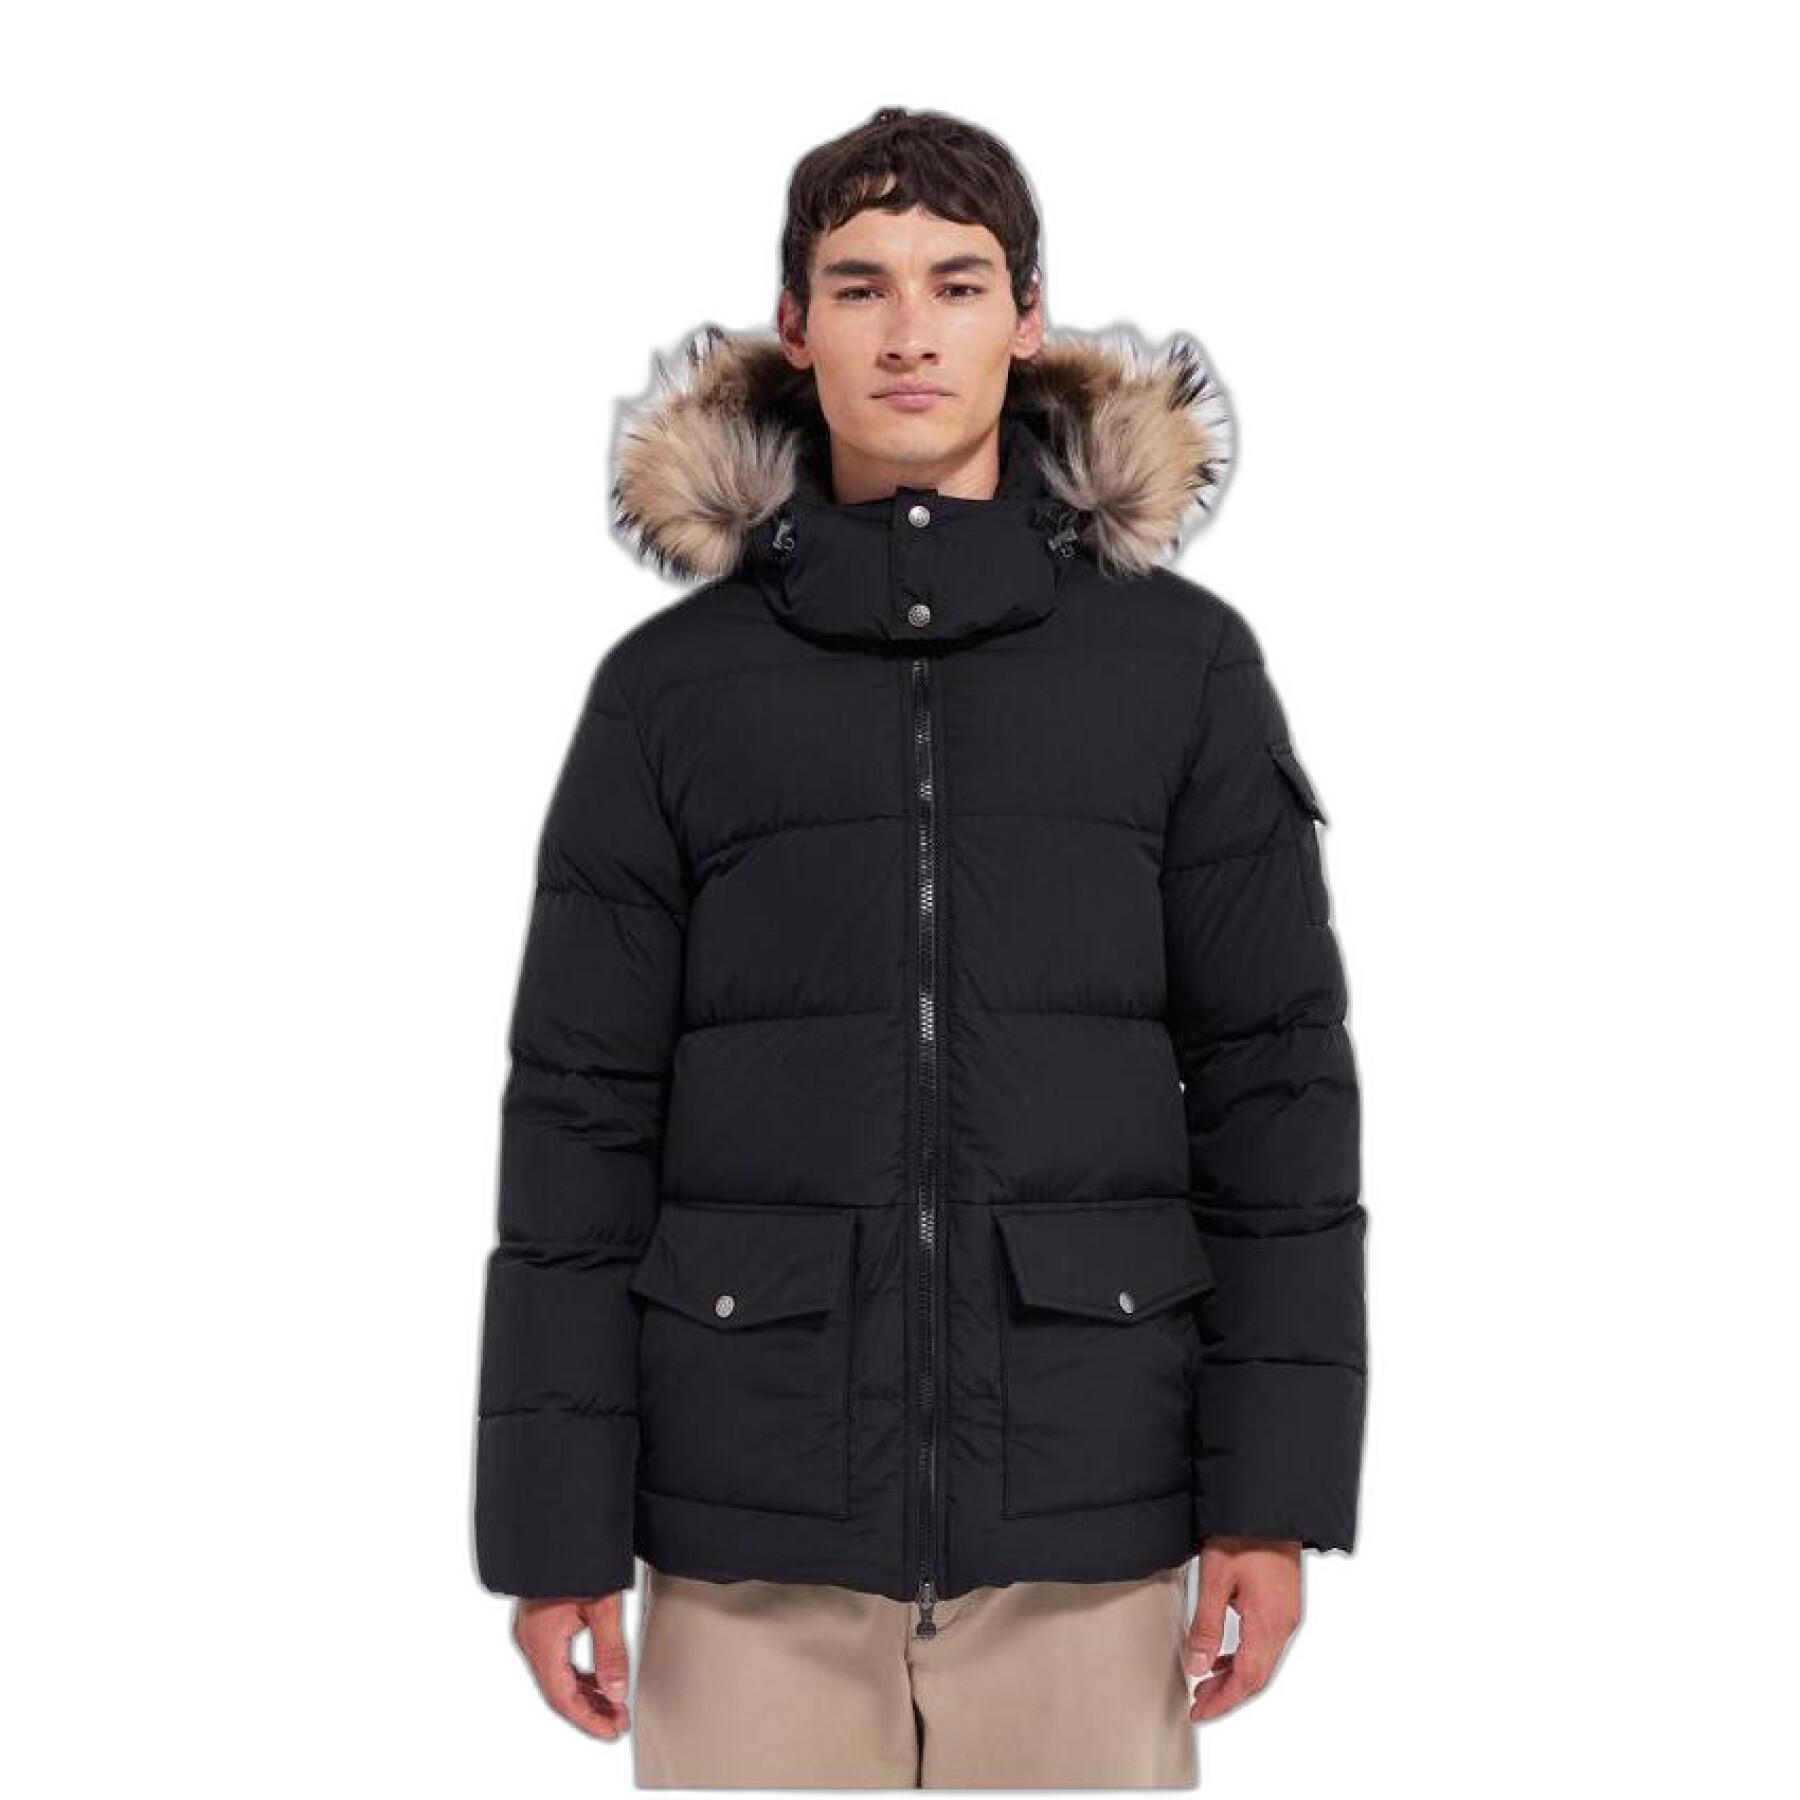 Down jacket with fur Pyrenex Authentic Mini Ripstop